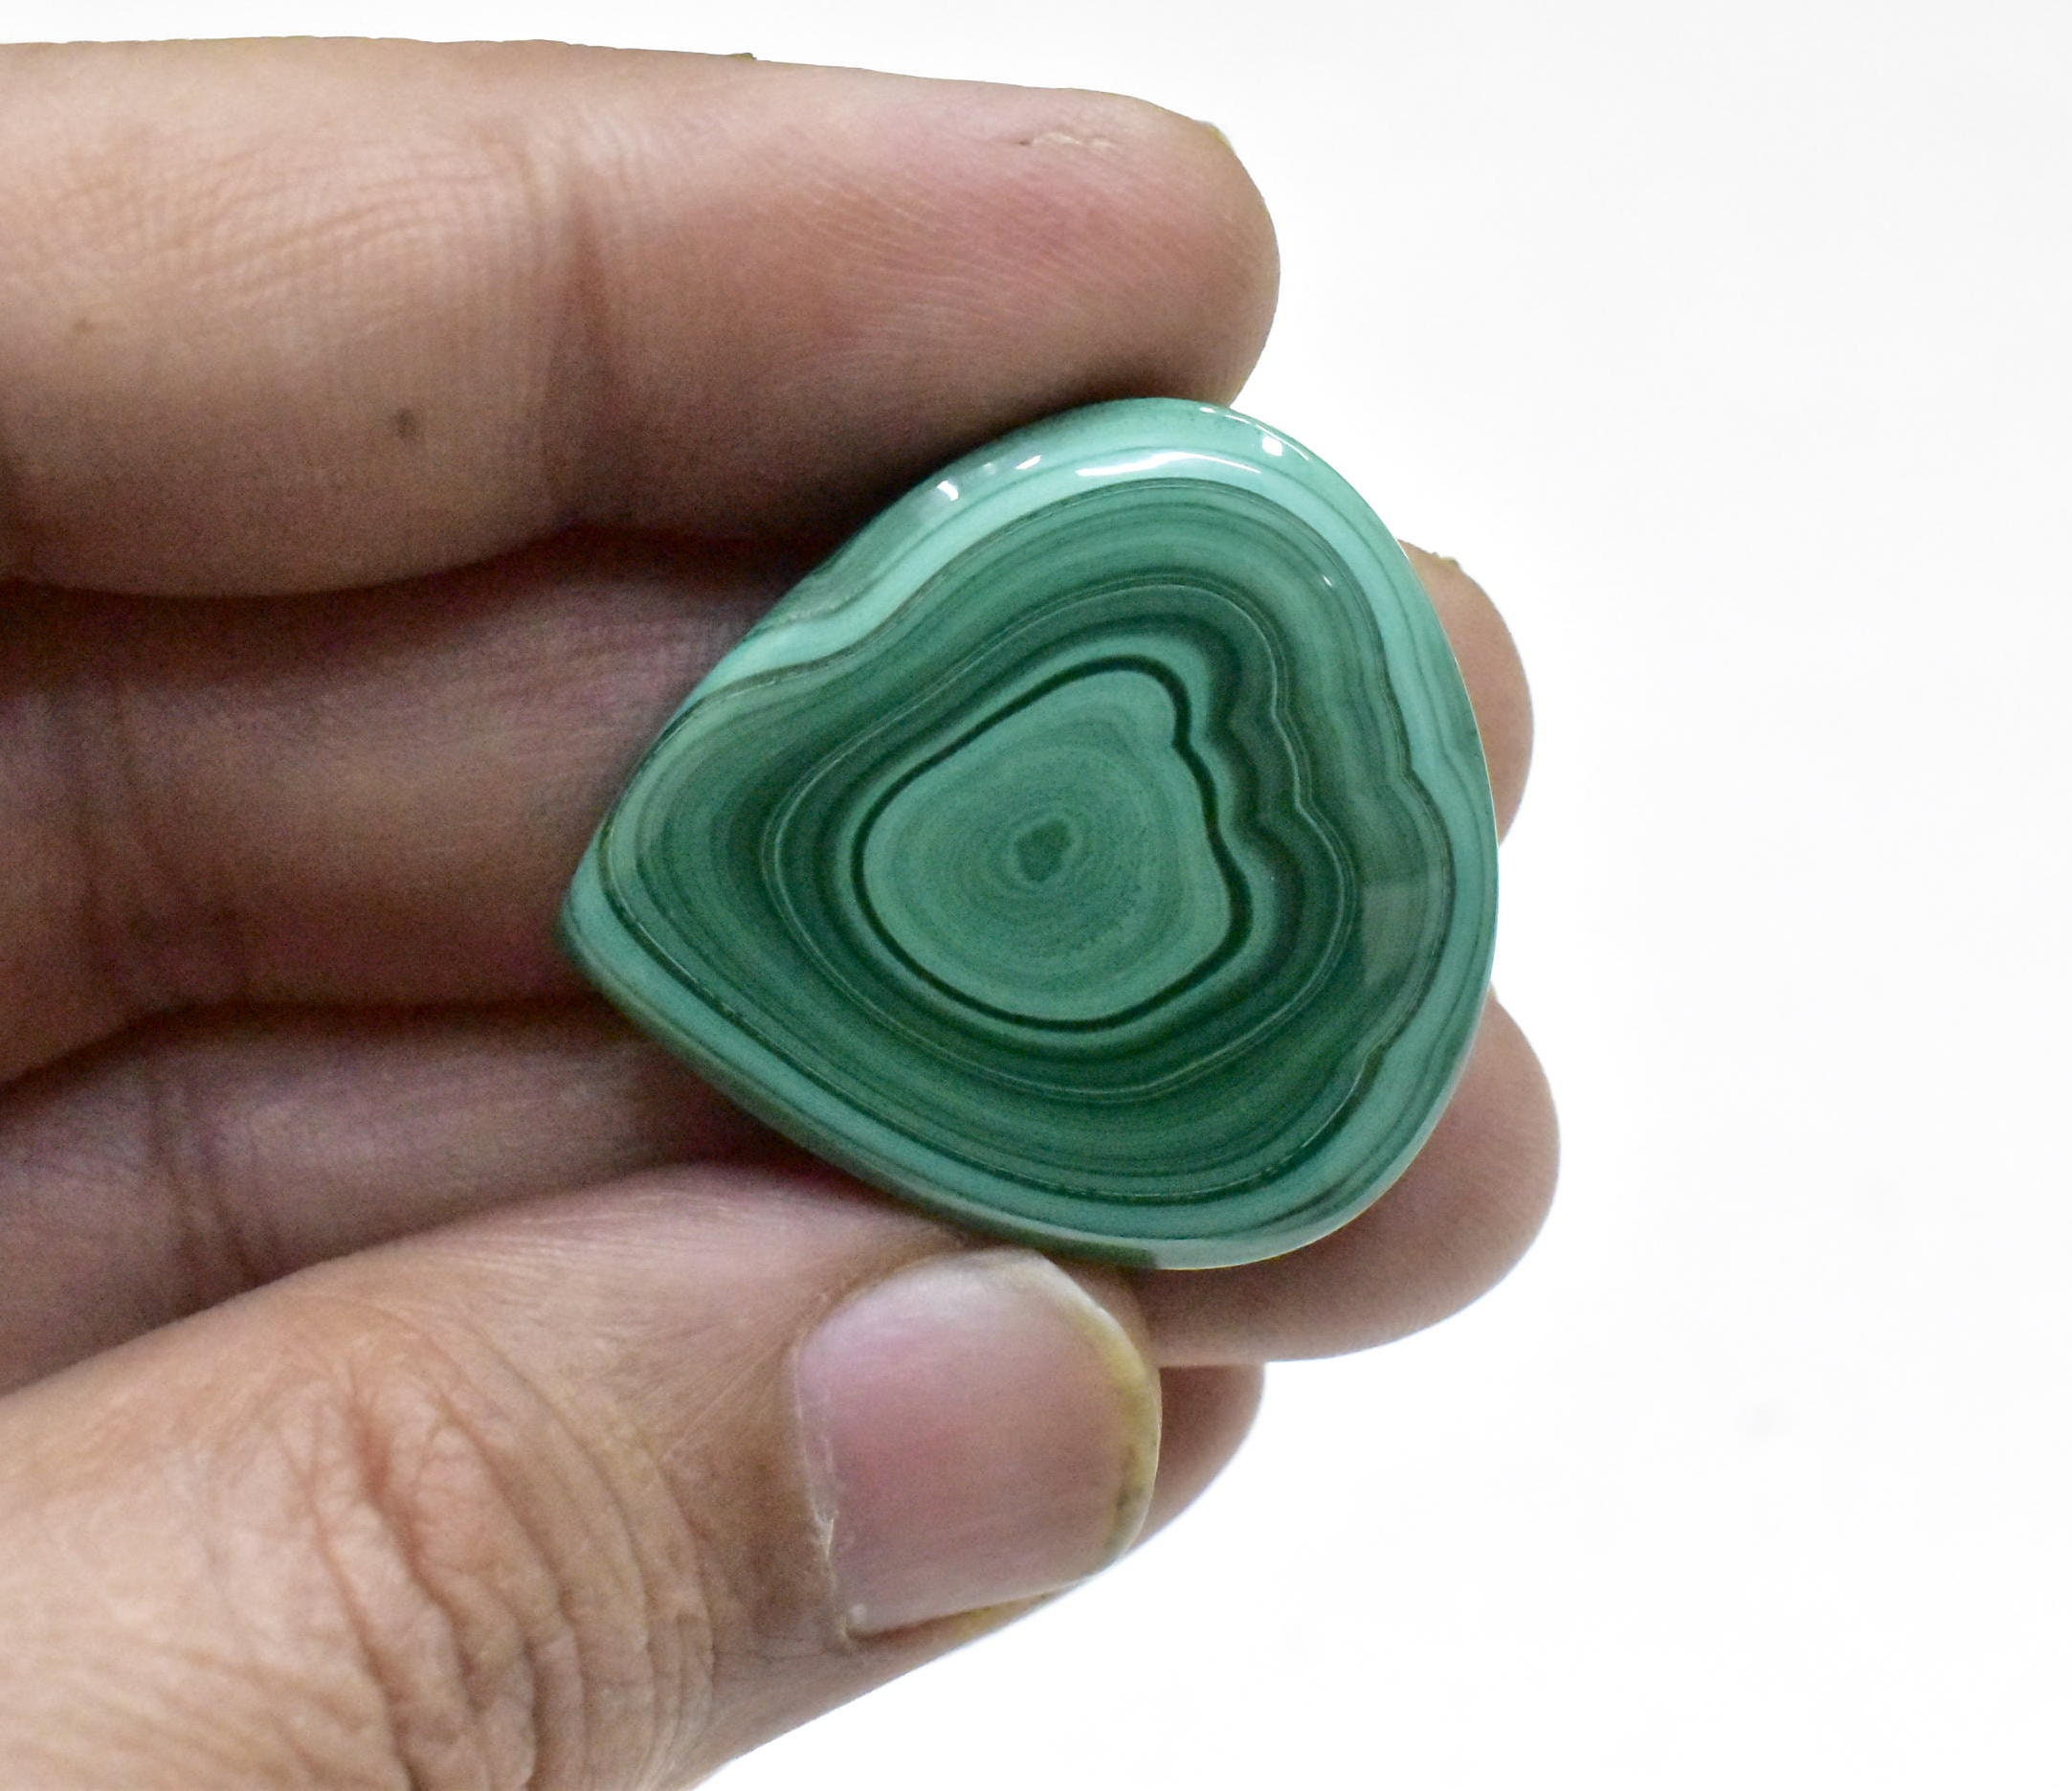 Natural Malachite Gemstone,Gemstone Cabochon,New Year Gift,Christmas Gift,Gift For Her,Mother’s Day Gift,Making For Jewellery,Gemstone Cab. | Save 33% - Rajasthan Living 11